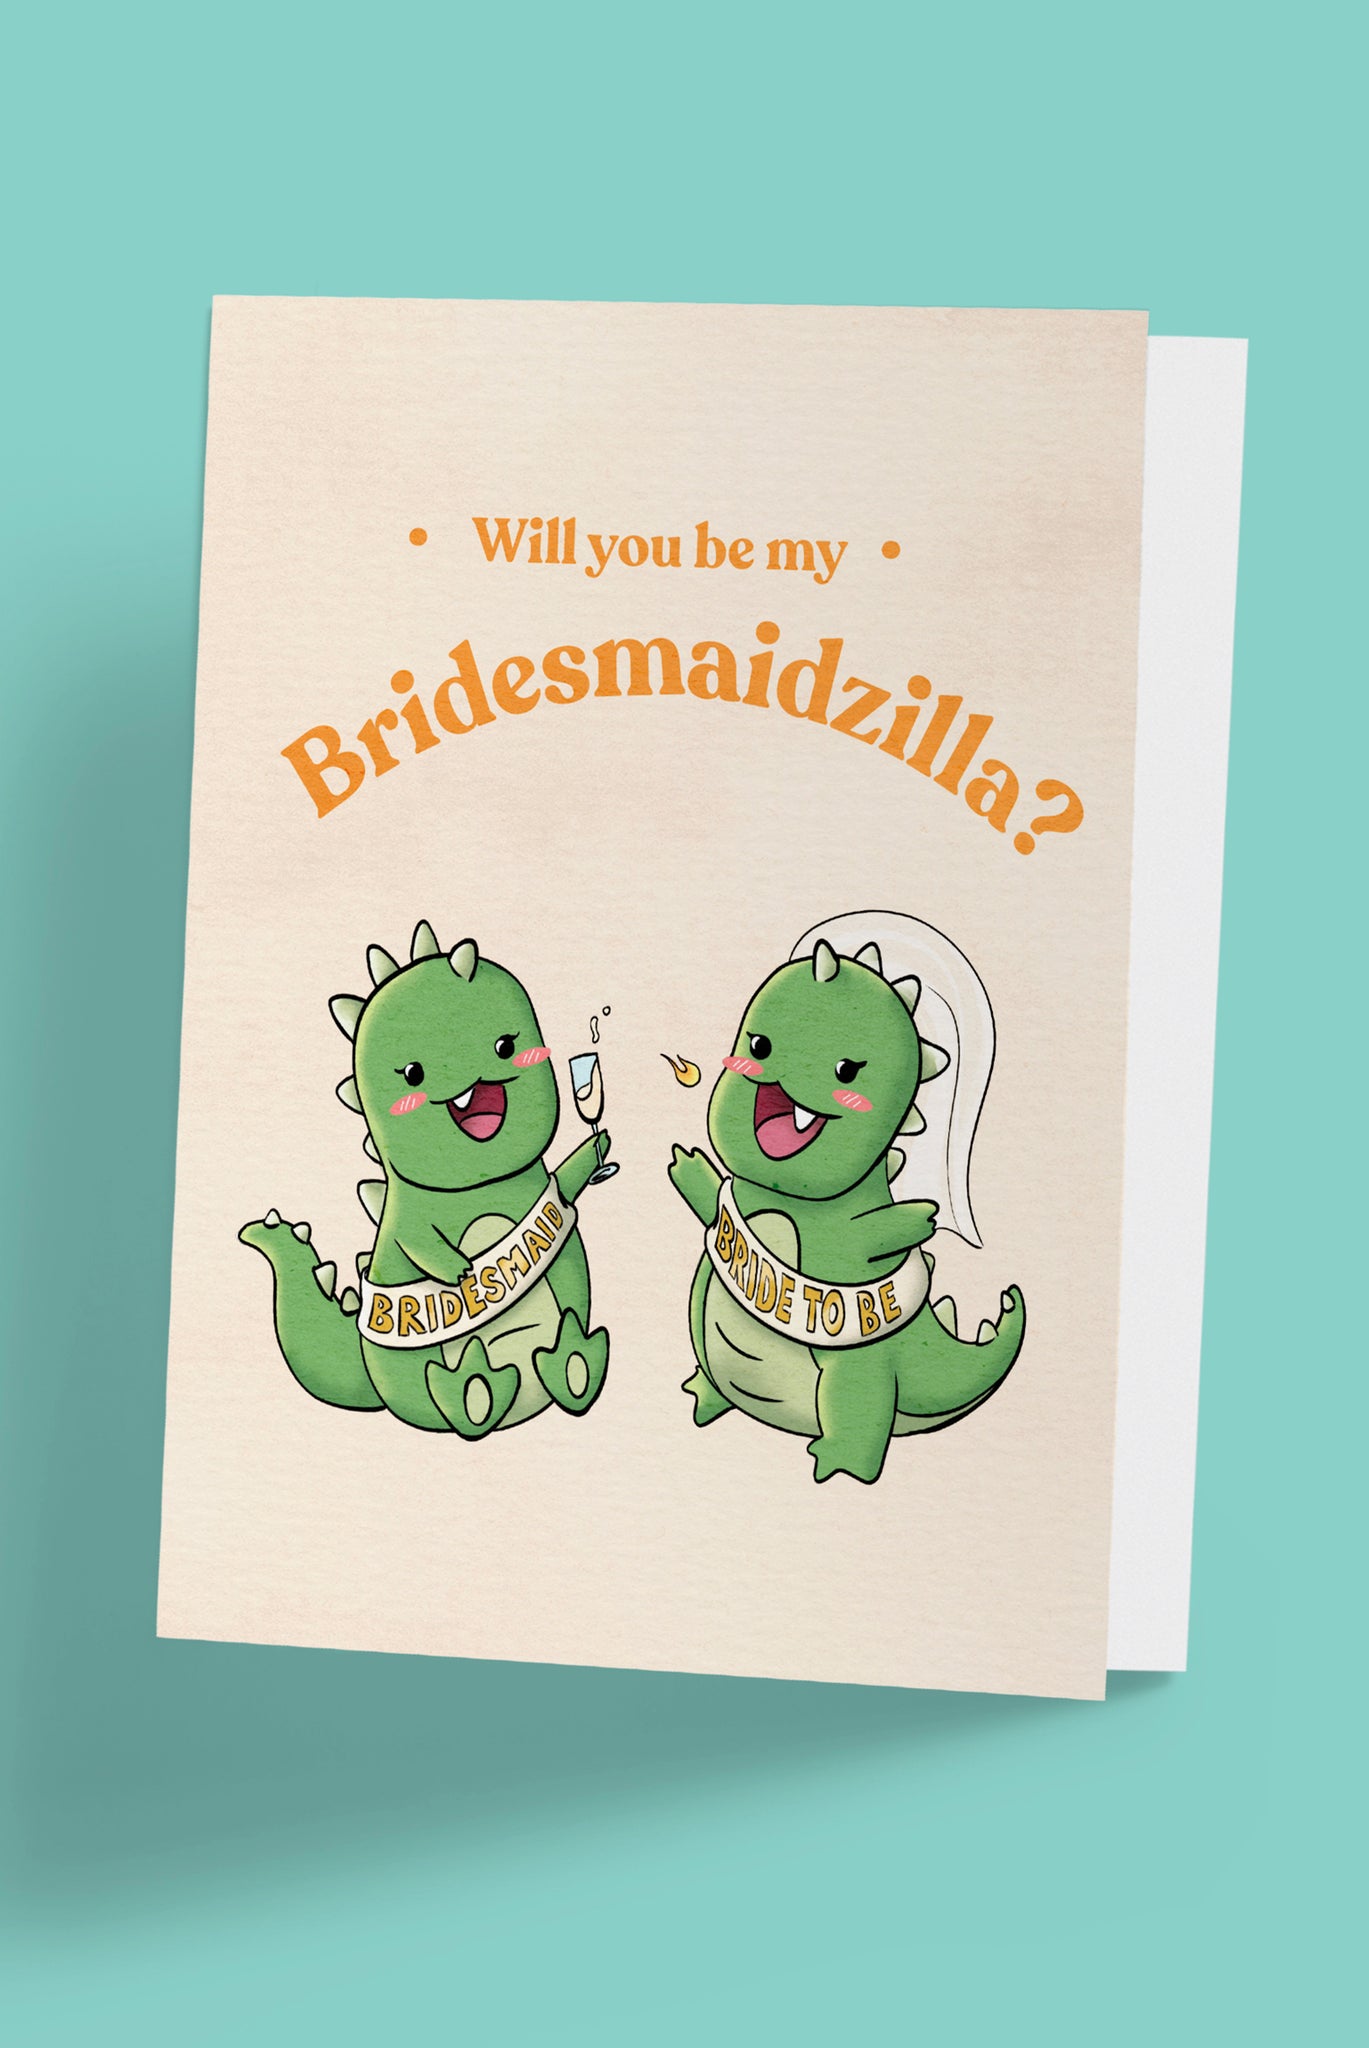 Yellow Bridesmaid Proposal Card for the Bridezilla Bride to be. Cute Dragons with Bride to be Sash